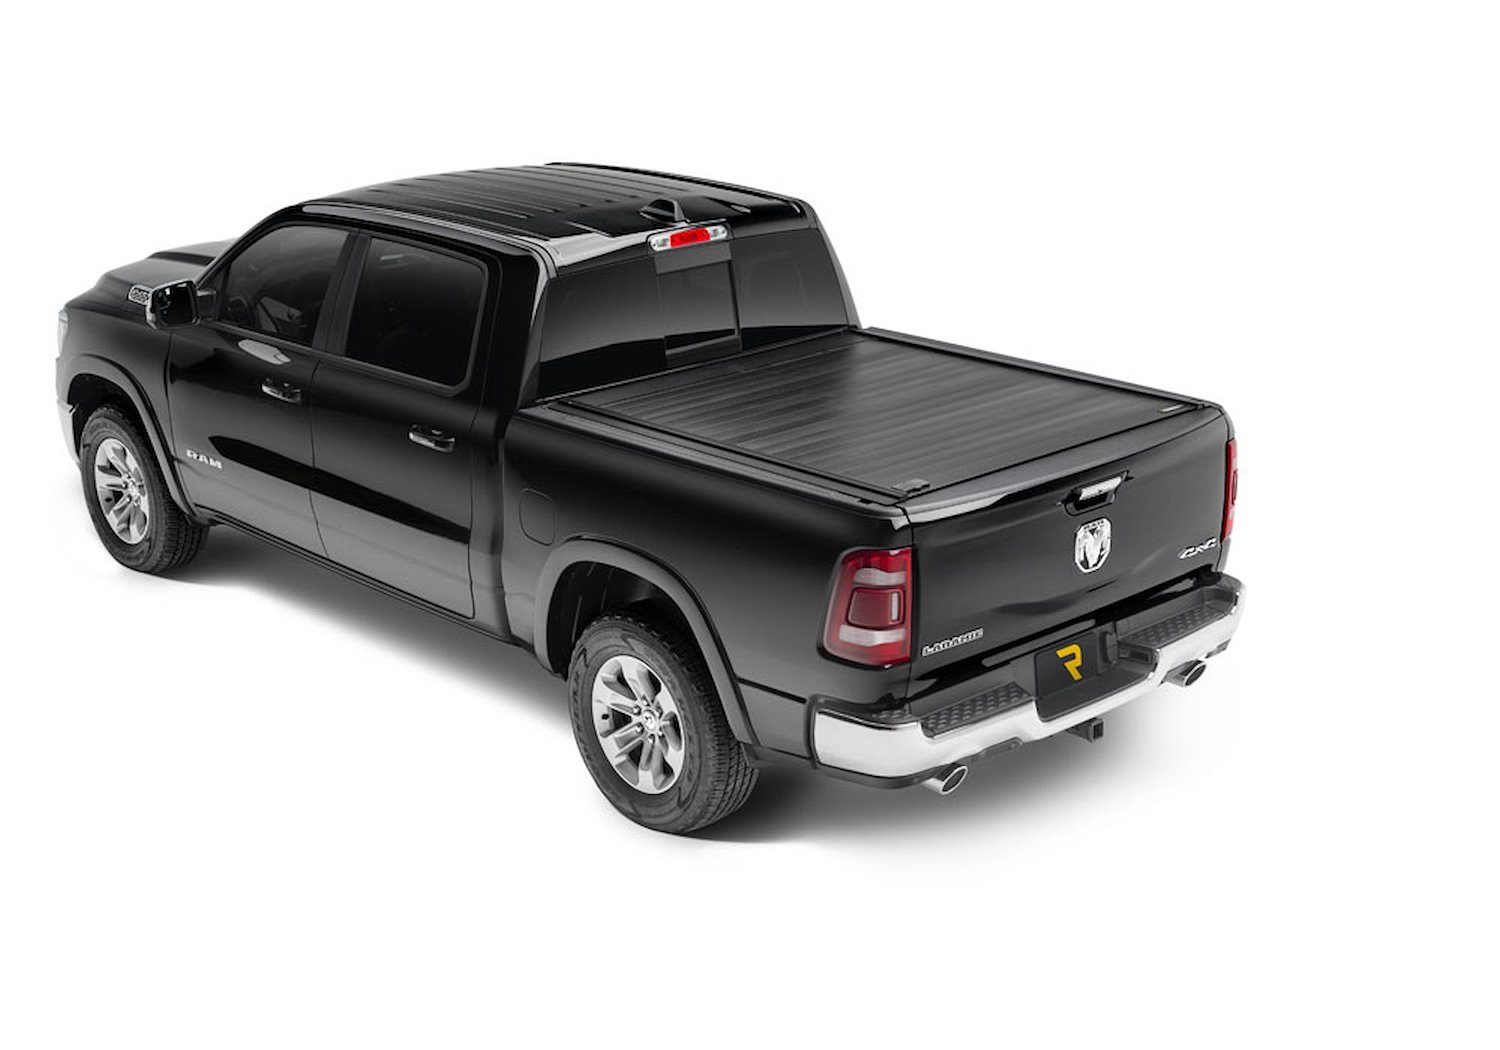 80235 RetraxPRO MX Retractable Tonneau Cover Fits Select Dodge/Ram 1500/2500/3500 6' 4" Bed with RamBox